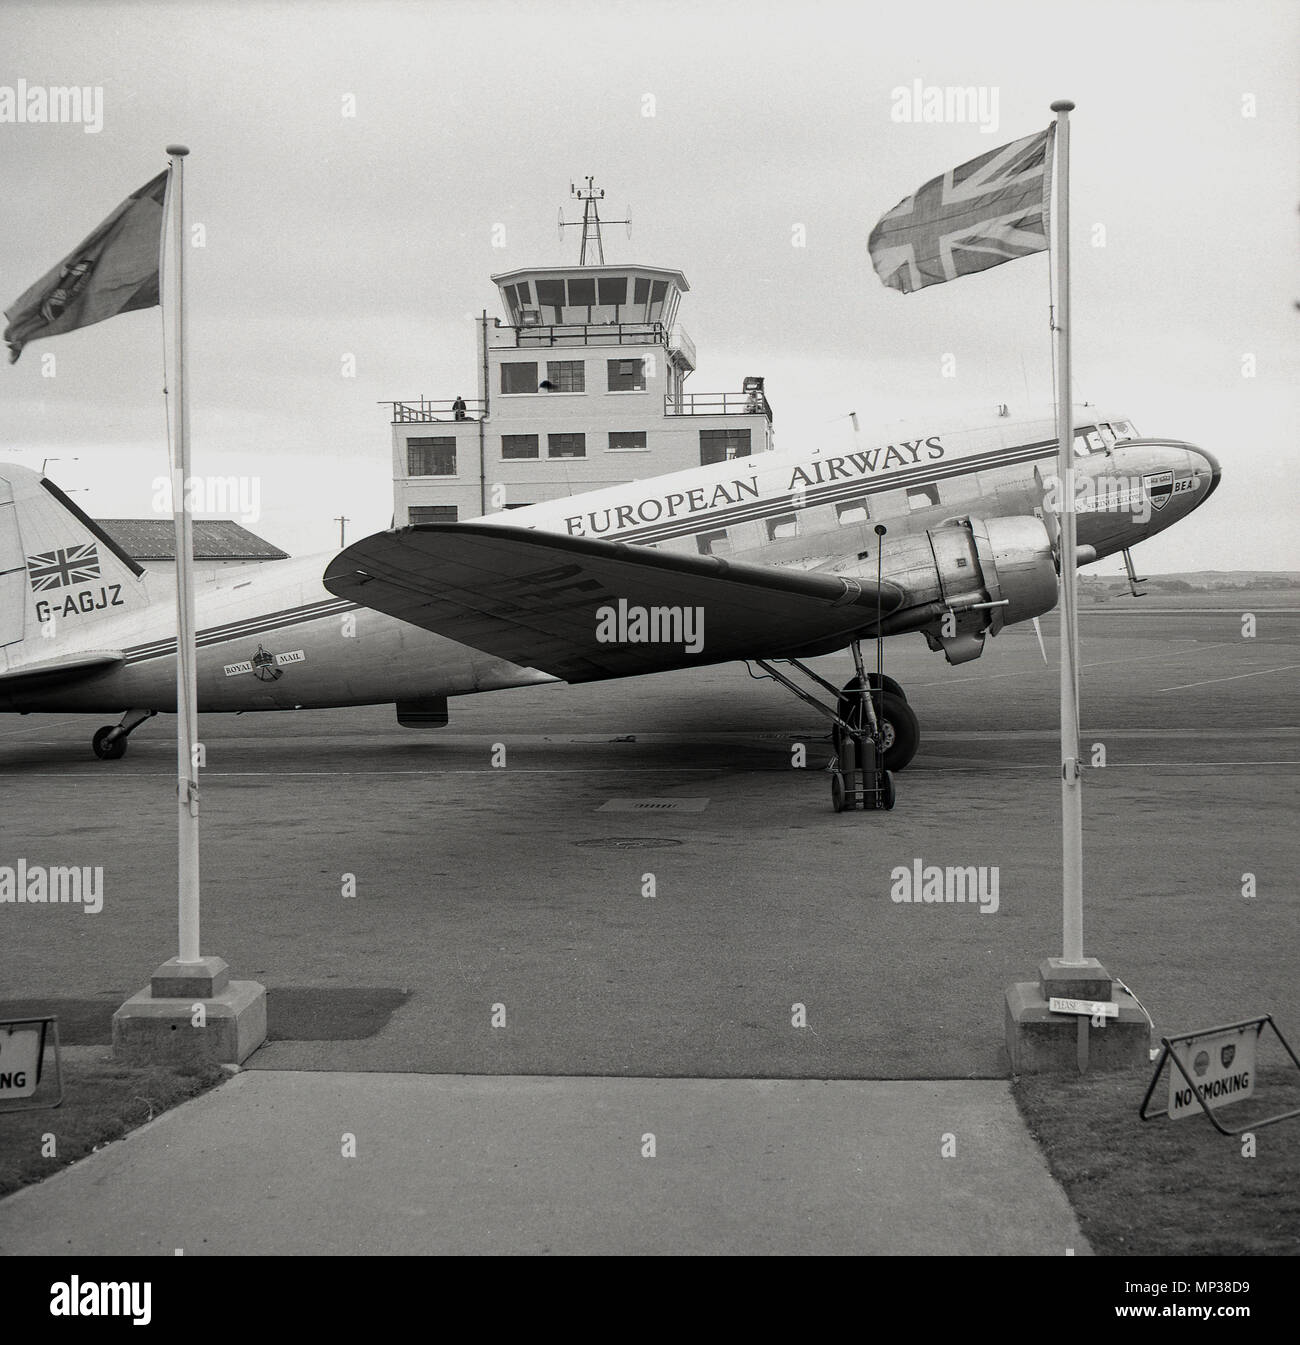 1950s, A Douglas C-47A (DC-3) Skytrain of the airline, Briitsh European Airways parked on a runway outside the entrance to a small european airport, possibly West Berlin in Germany. In the 1960s the Briitsh airline became the fifth biggest passenger-carrying airline in the Western World. The plane shown, built in 1943, was former RAF plane, and was converted by scottish aviation and named RMA John Stringfellow after an early British aviator. It served BEA from 1946 to 1960. Stock Photo